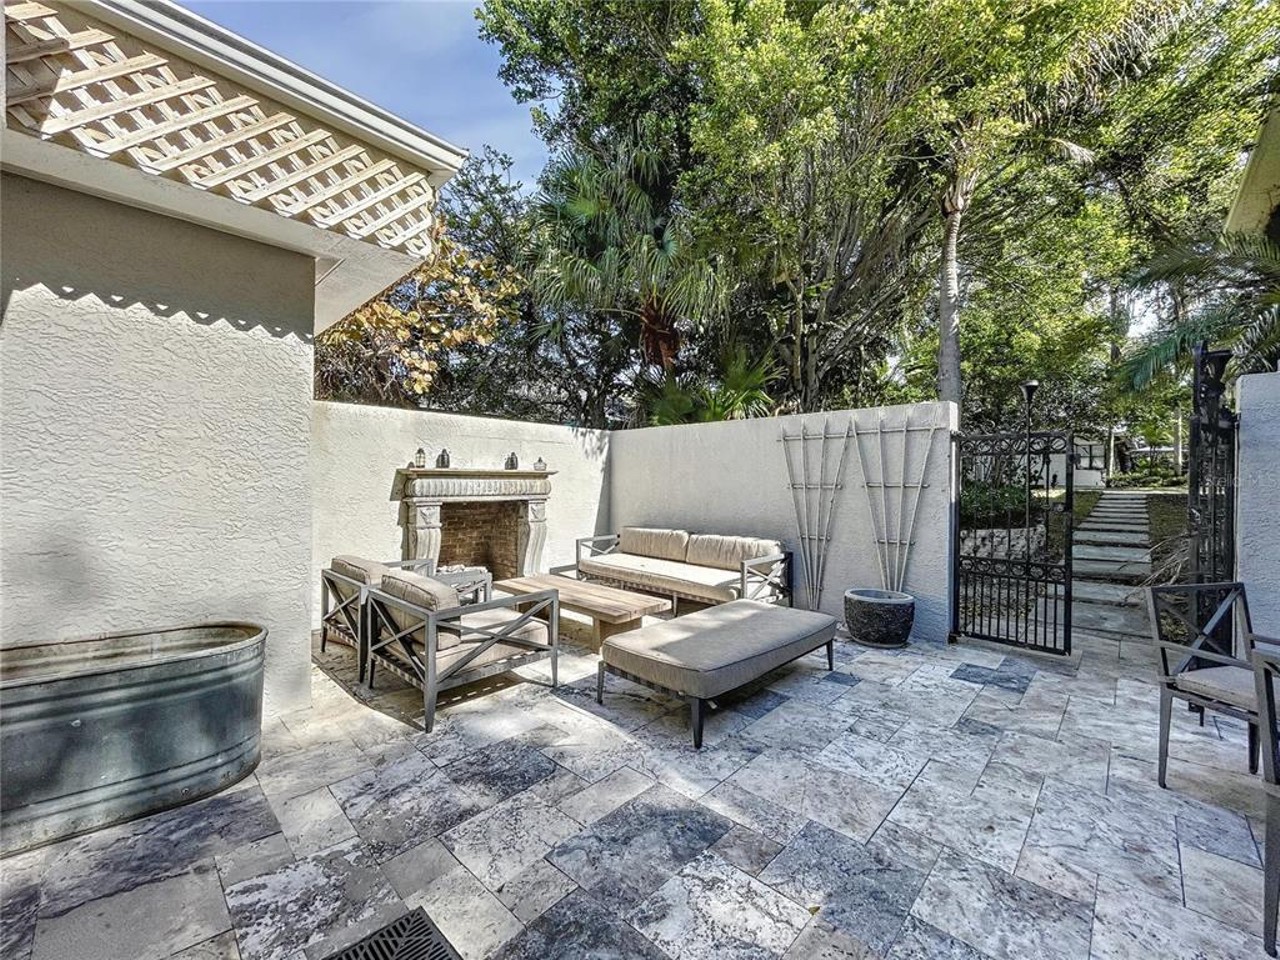 The Clearwater home of late 'Cheers' actress Kirstie Alley is now for sale